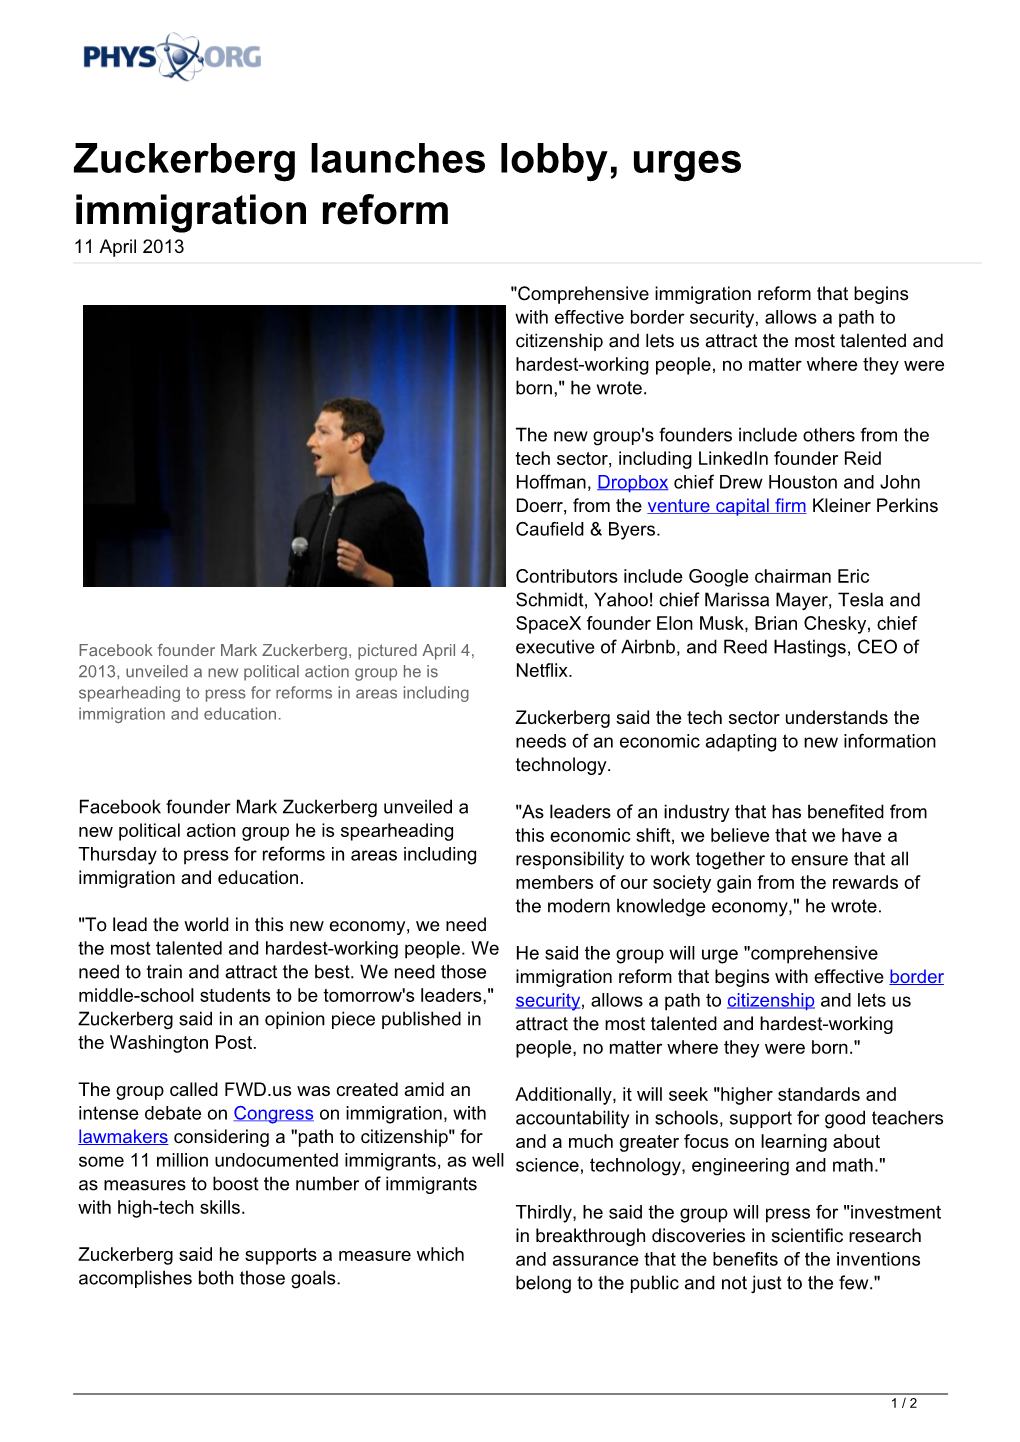 Zuckerberg Launches Lobby, Urges Immigration Reform 11 April 2013